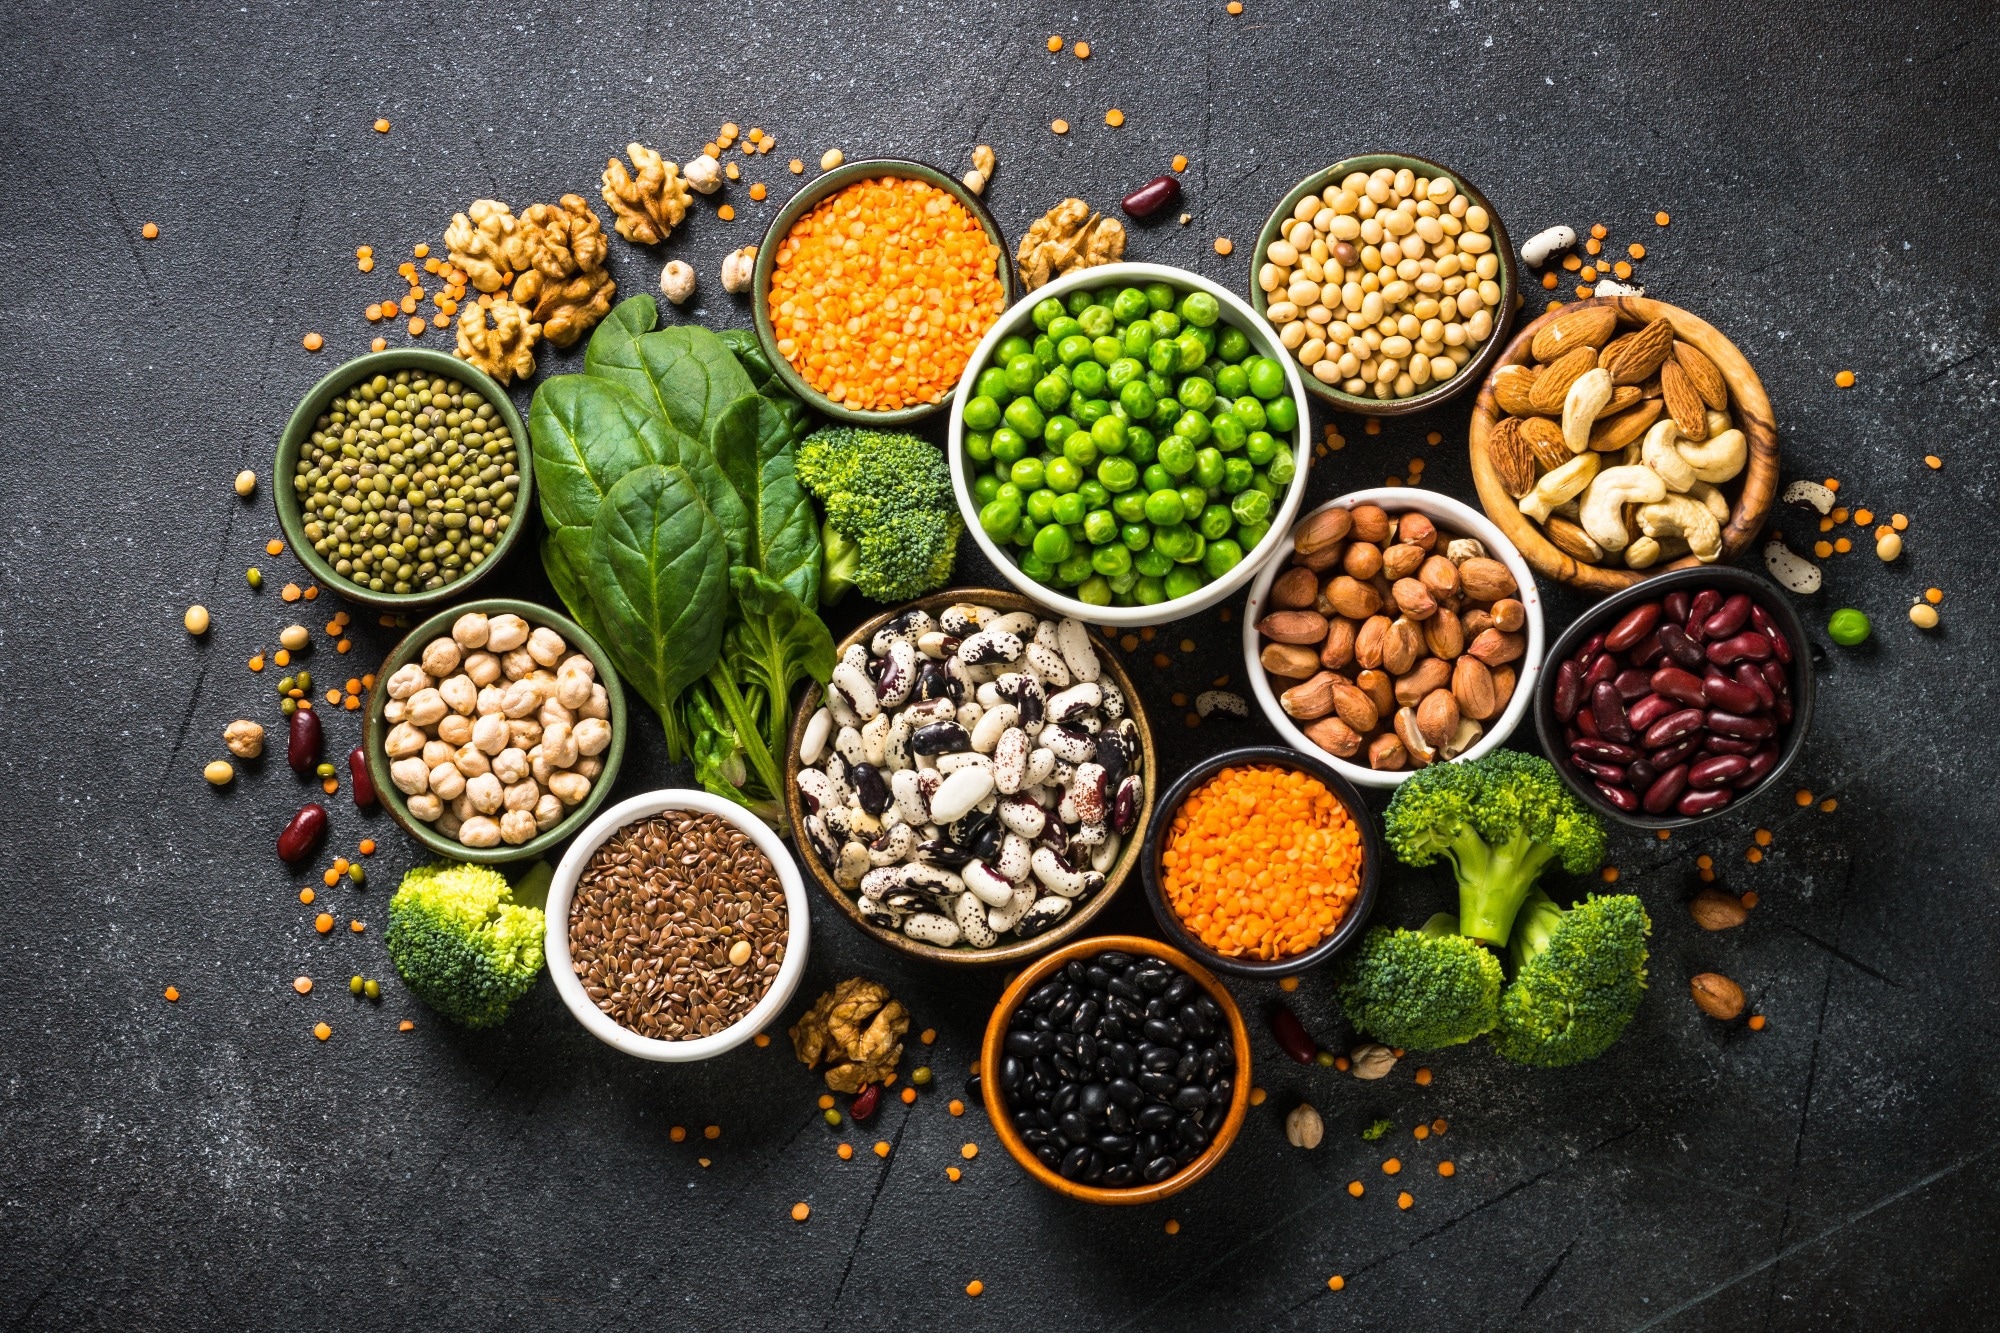 Study: Dietary protein intake in midlife in relation to healthy aging – results from the prospective Nurses’ Health Study cohort. Image Credit: nadianb / Shutterstock